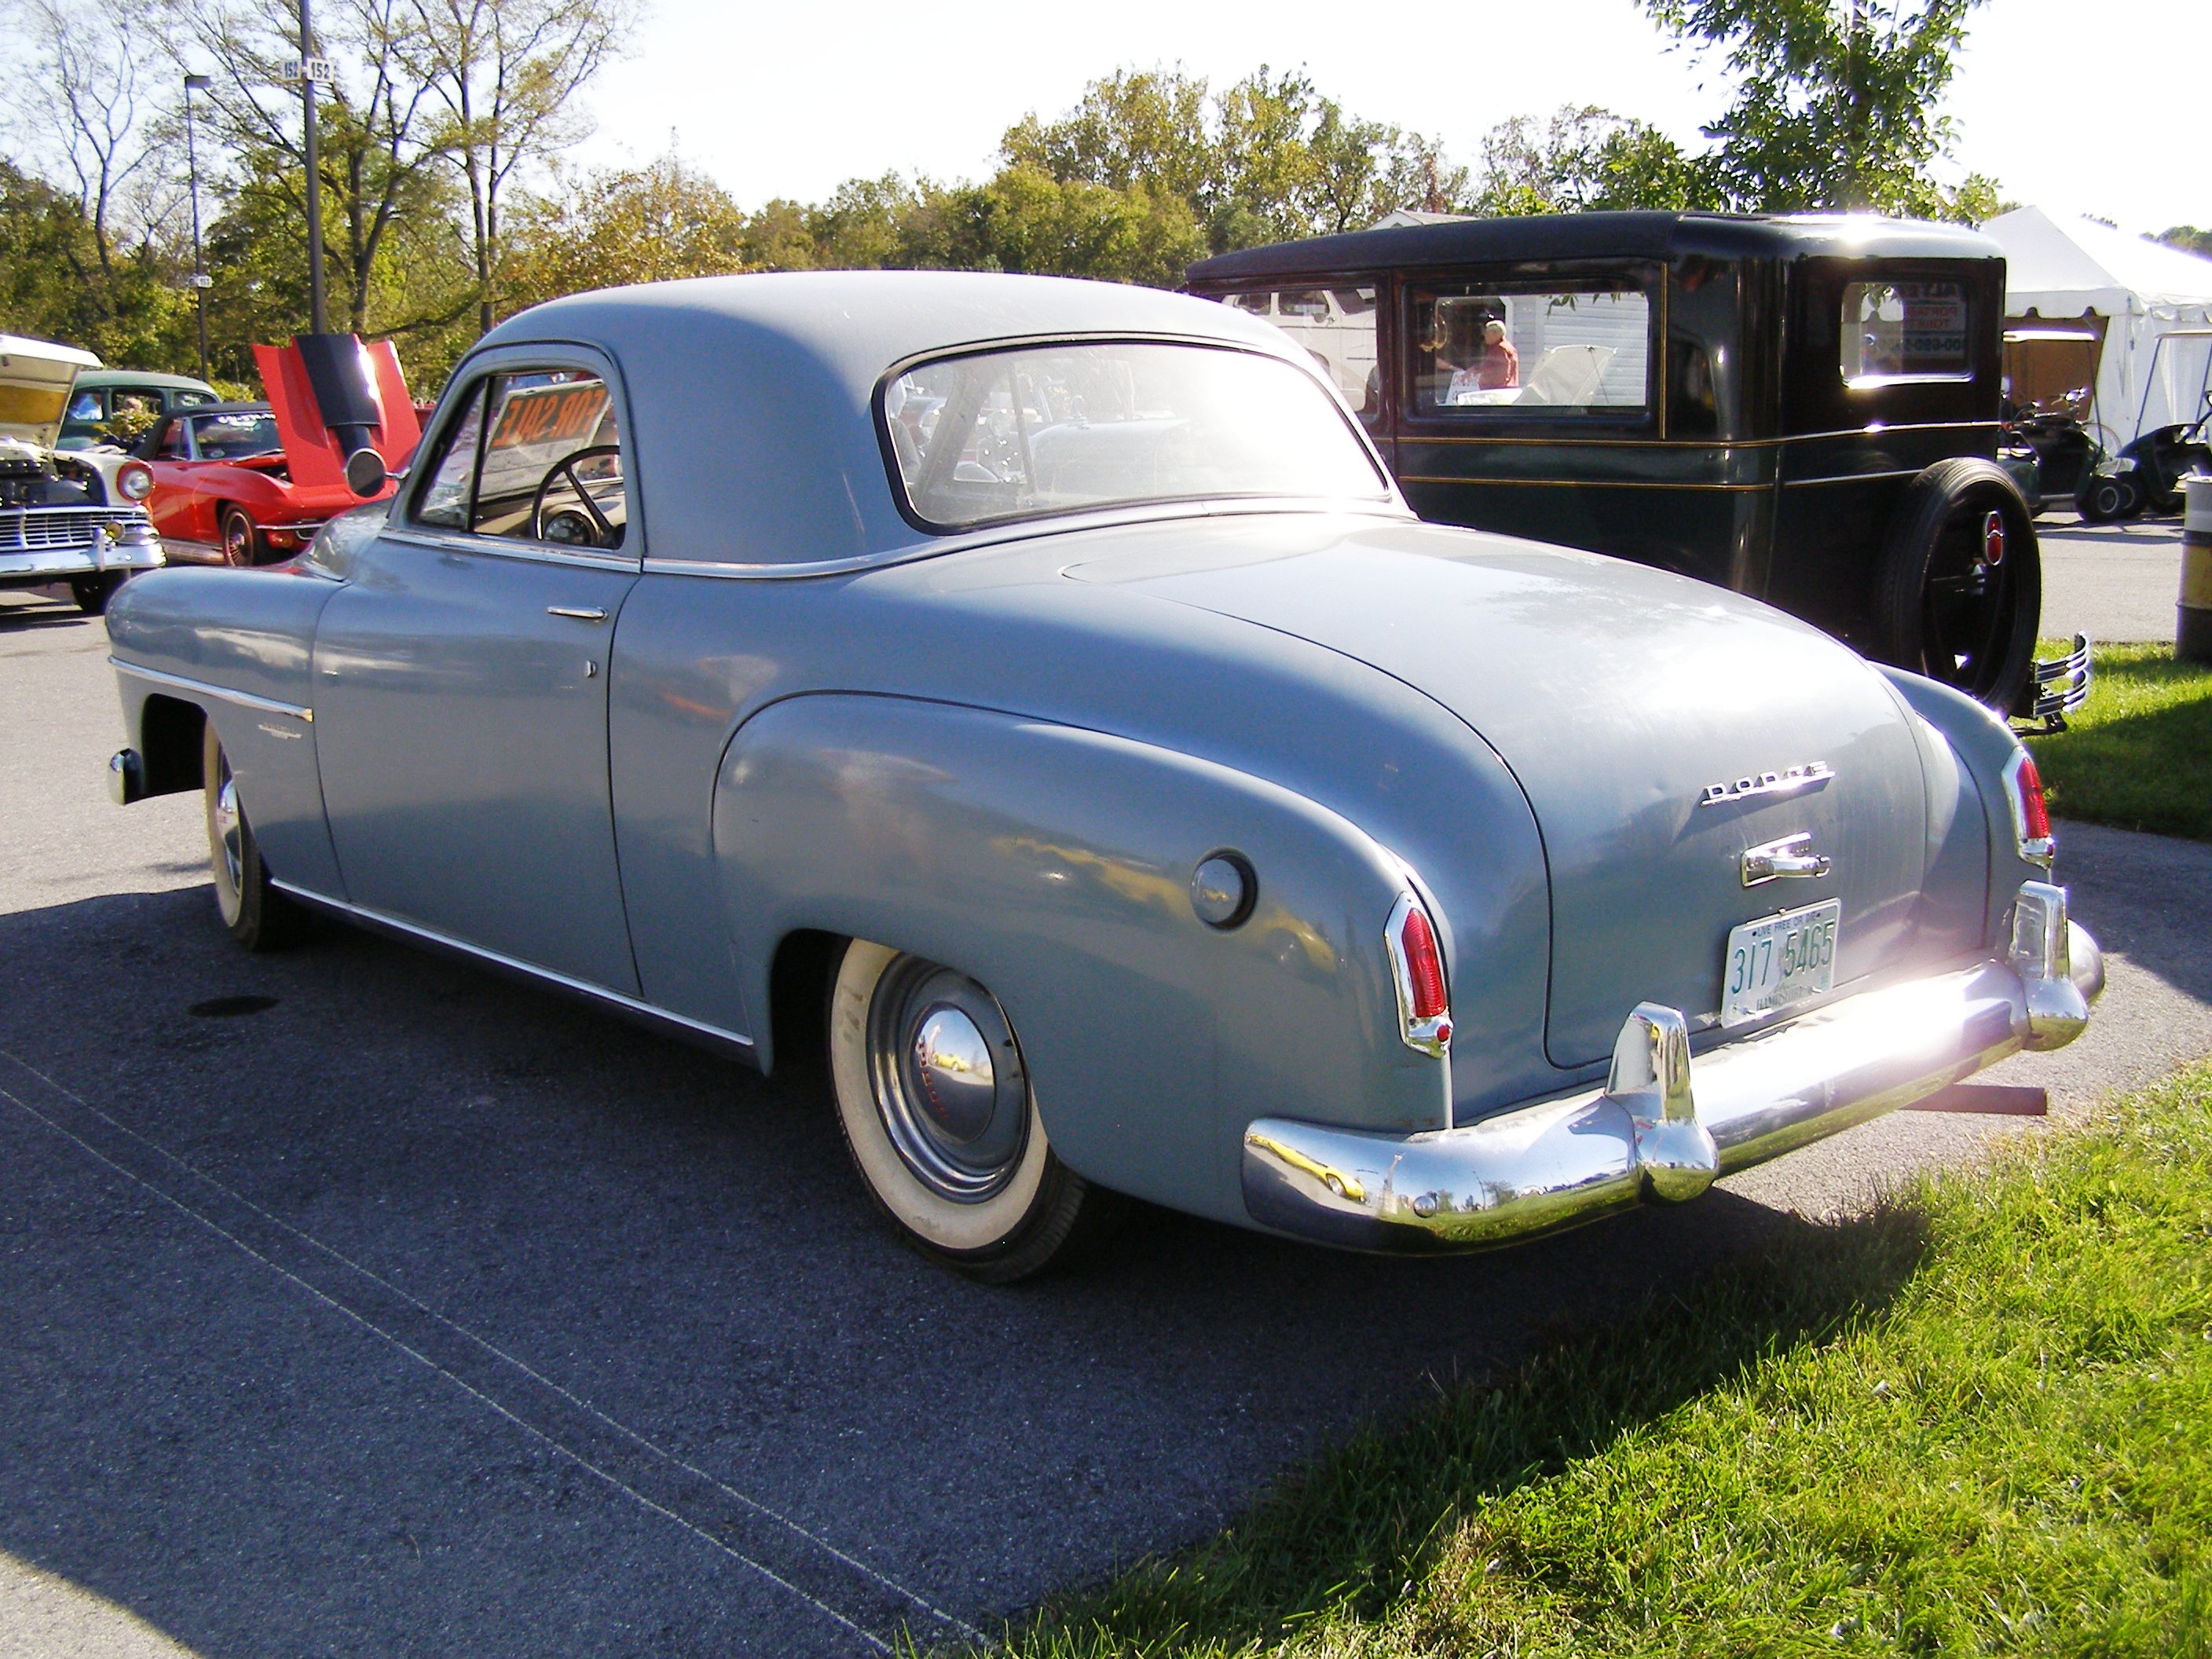 1952 Dodge Business Coupe | Flickr - Photo Sharing!